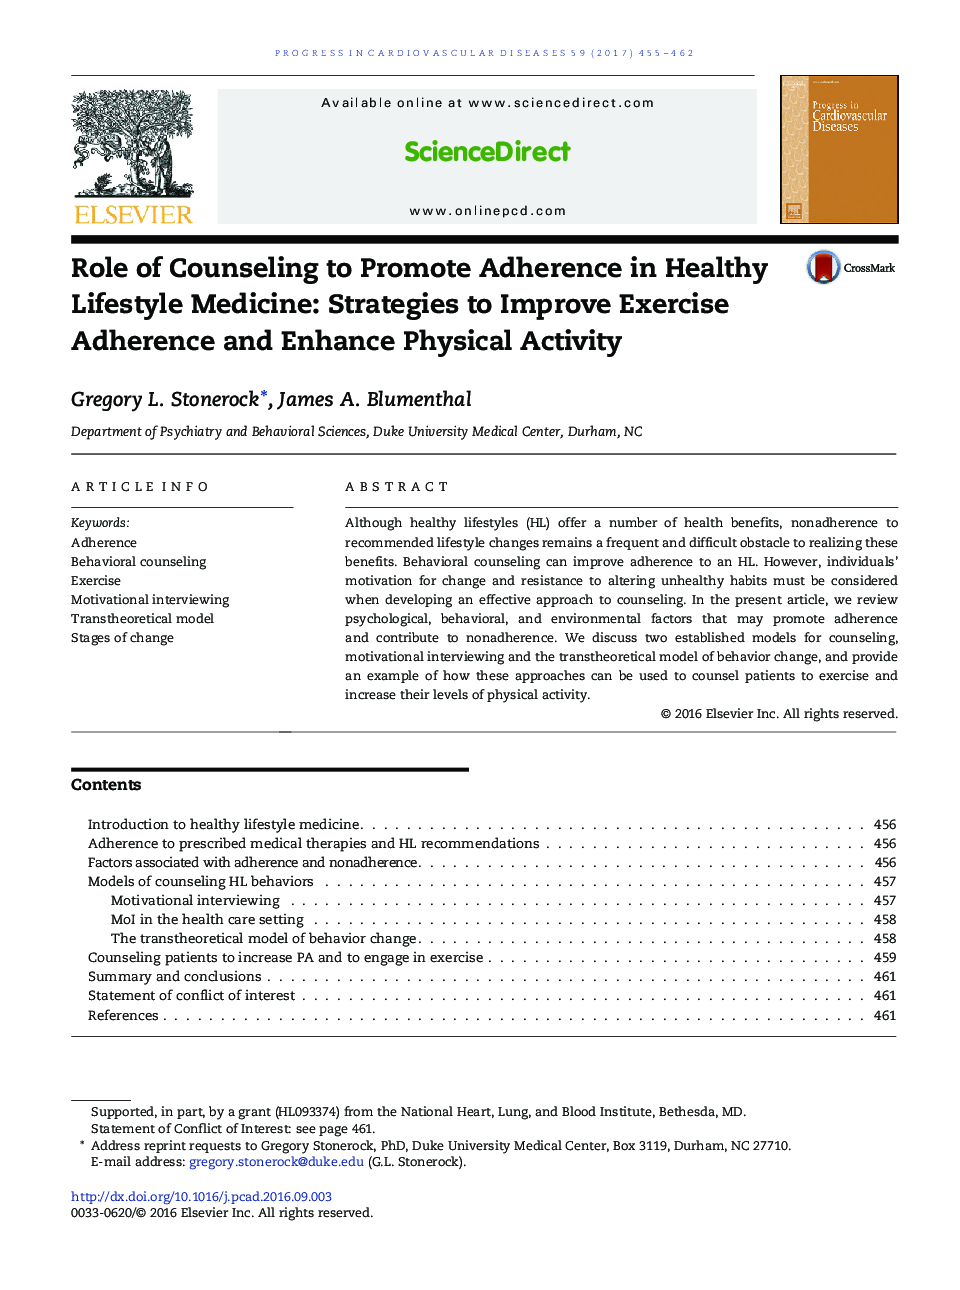 Role of Counseling to Promote Adherence in Healthy Lifestyle Medicine: Strategies to Improve Exercise Adherence and Enhance Physical Activity